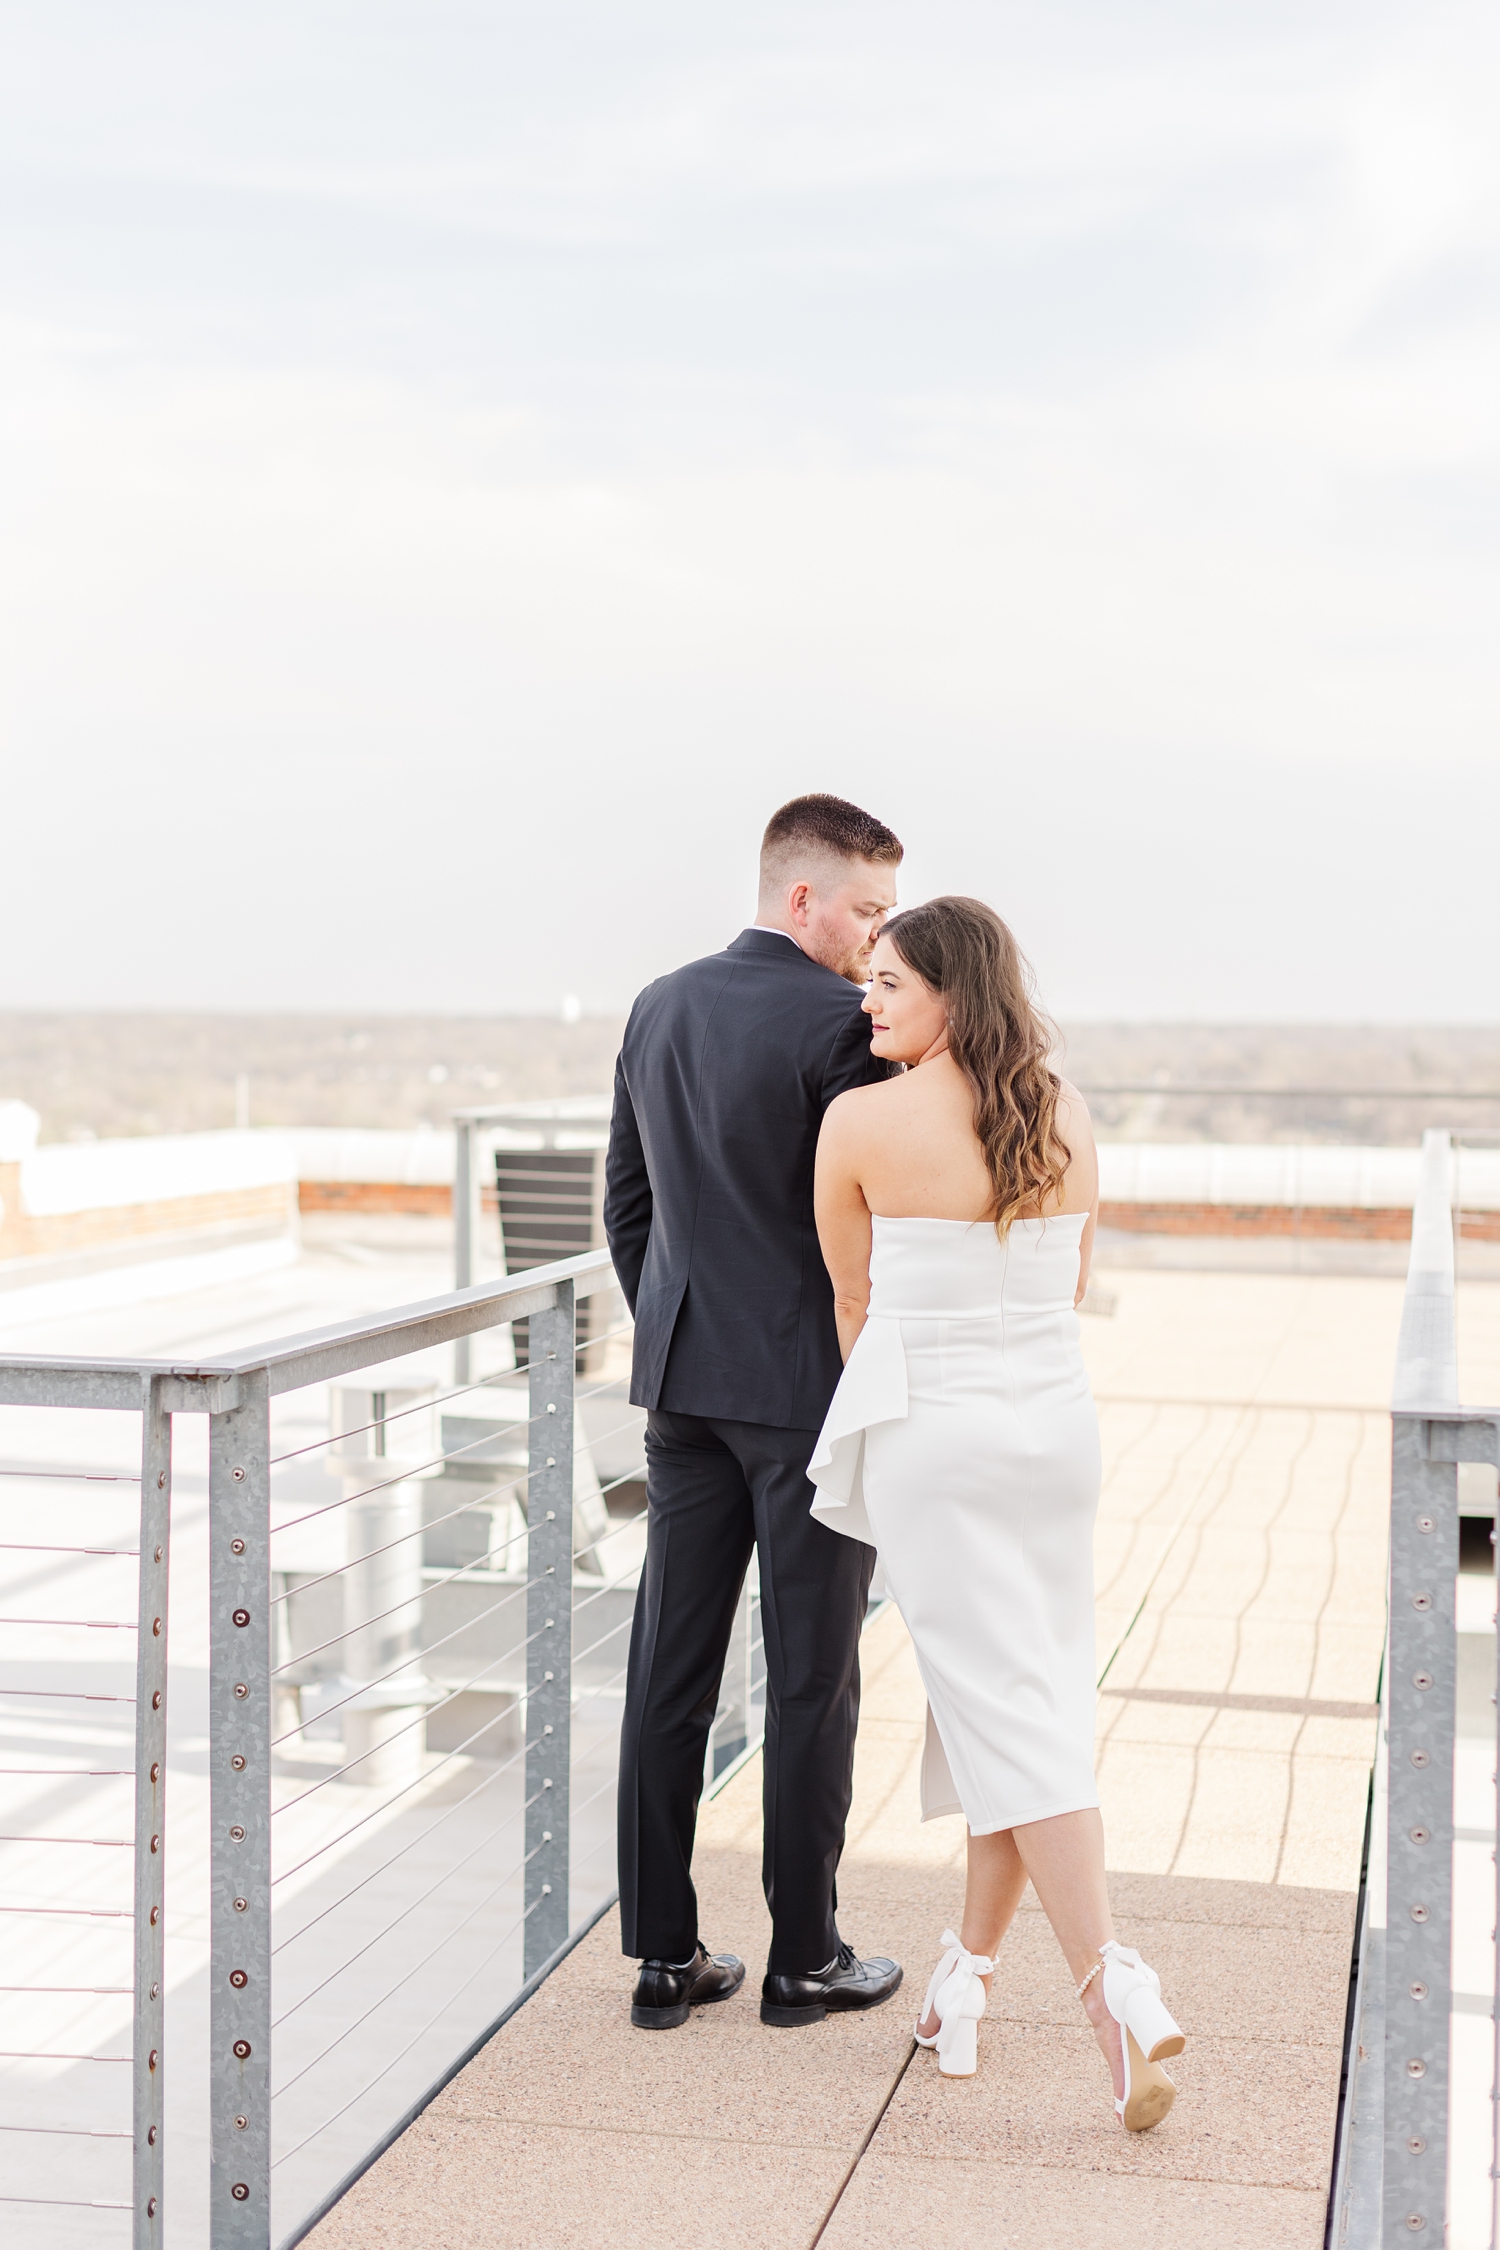 Jenna and Dustin walk along the rooftop of the The Equitable Building in Des Moines, IA and pause to look at the view of the cityscape | CB Studio